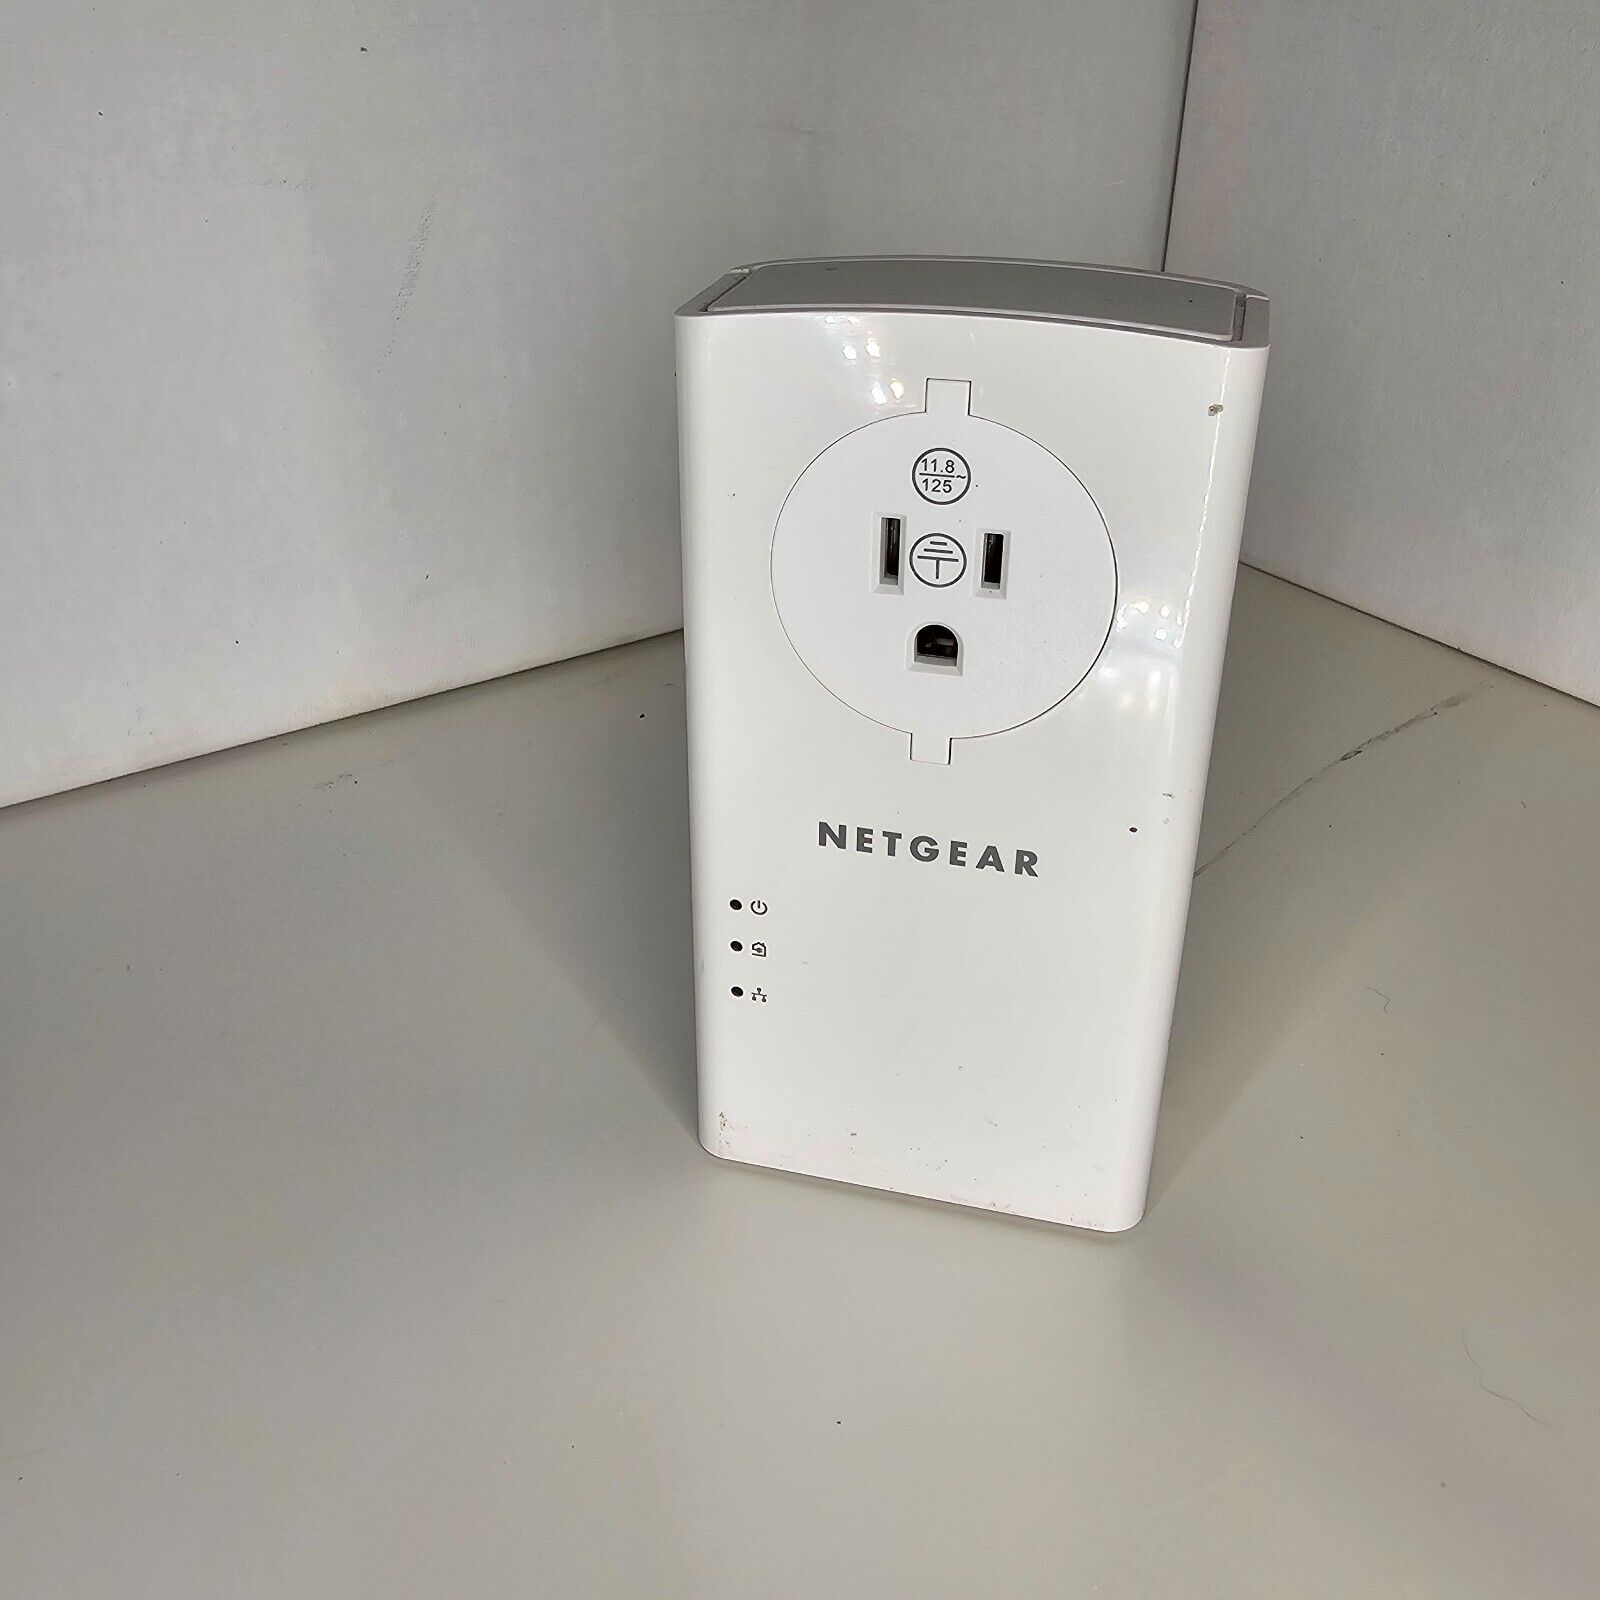 NETGEAR Powerline, 2000 Mbps, 2 GB Ethernet Ports + Extra Outlet, PLP2000💻🚀